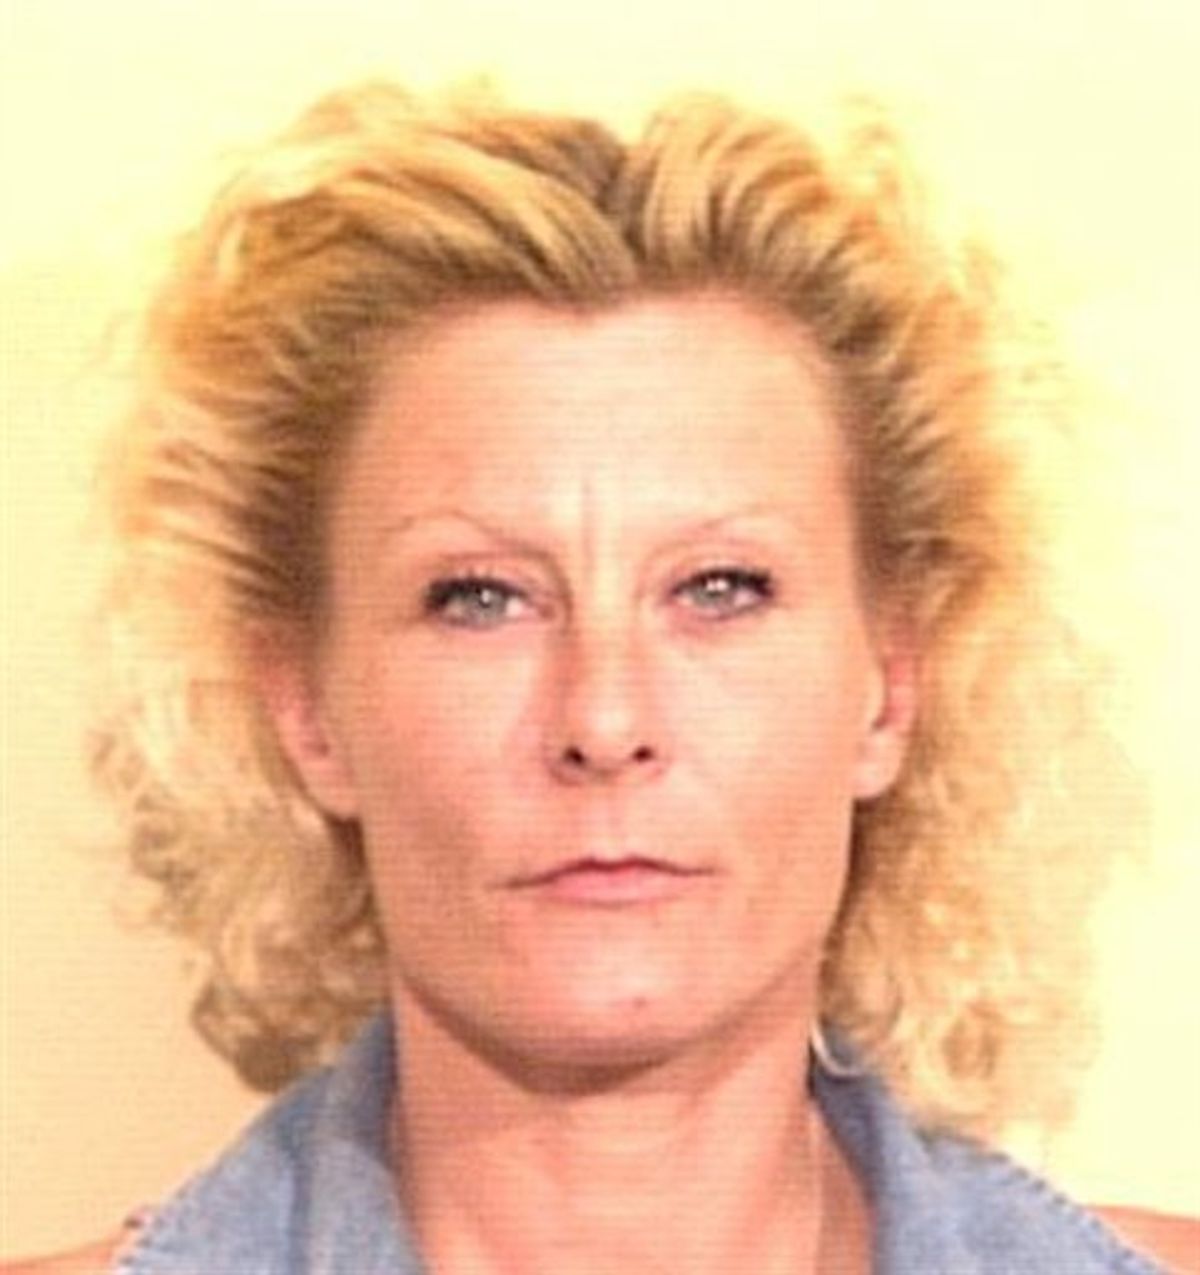 In this June 26, 1997 booking photo released by the Tom Green County Jail in San Angelo, Texas, is shown Colleen R. LaRose. LaRose, the self-described "Jihad Jane" who thought her blond hair and blue eyes would let her blend in as she sought to kill an artist in Sweden, is a rare case of an American woman aiding foreign terrorists and shows the evolution of the global threat, authorities say. LaRose is accused in an indictment filed Tuesday, March 9, 2010, of actively recruiting fighters, as well as agreeing to murder the artist, marry a terrorism suspect so he could move to Europe and martyr herself if necessary. (AP Photo/Tom Green County Jail) (AP)